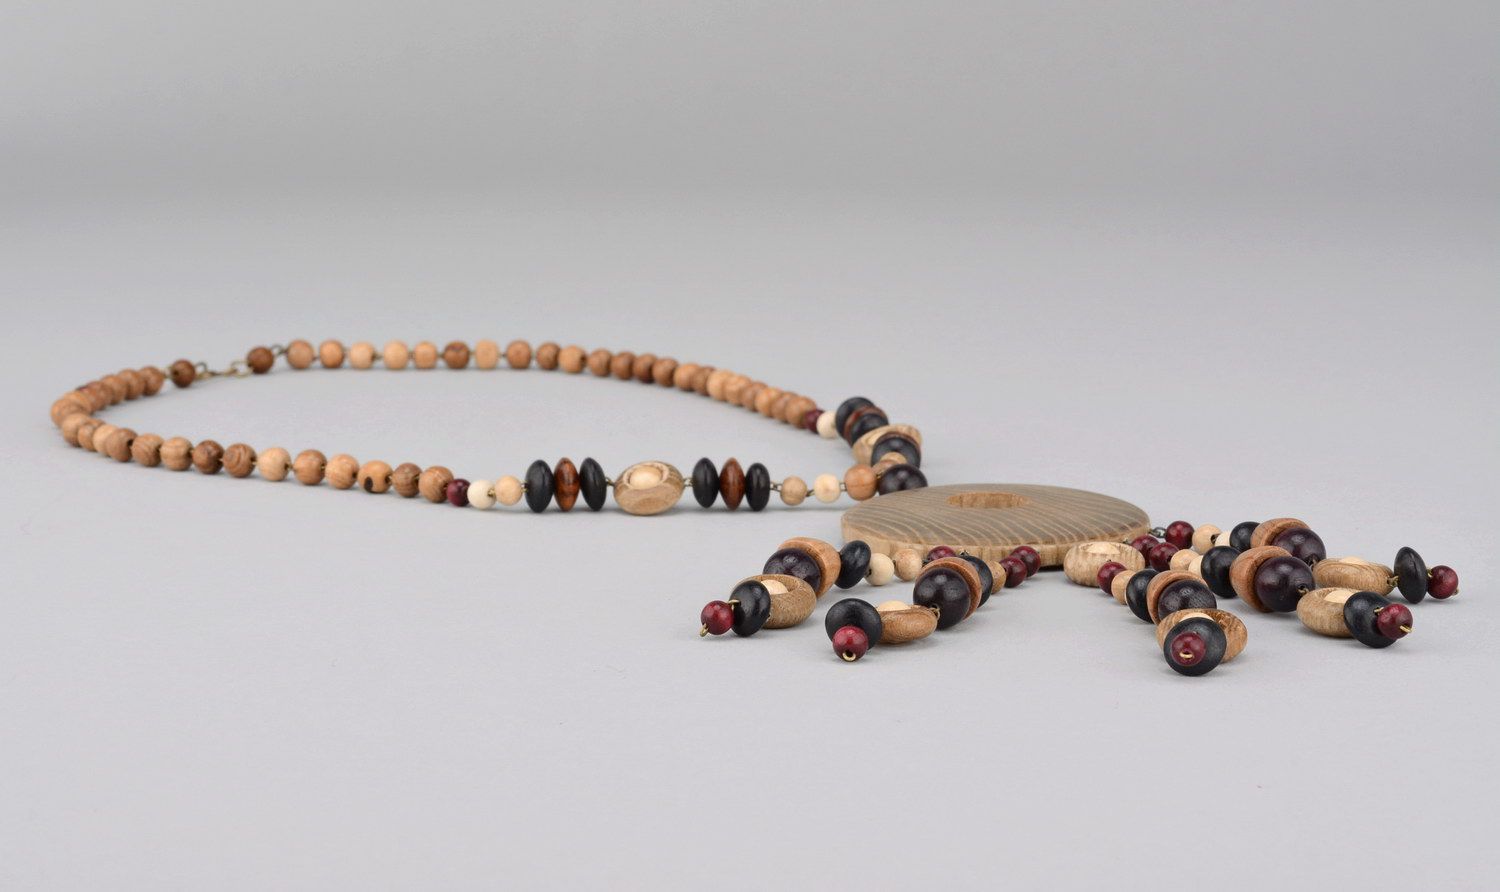 Long wooden necklace with clasp photo 2